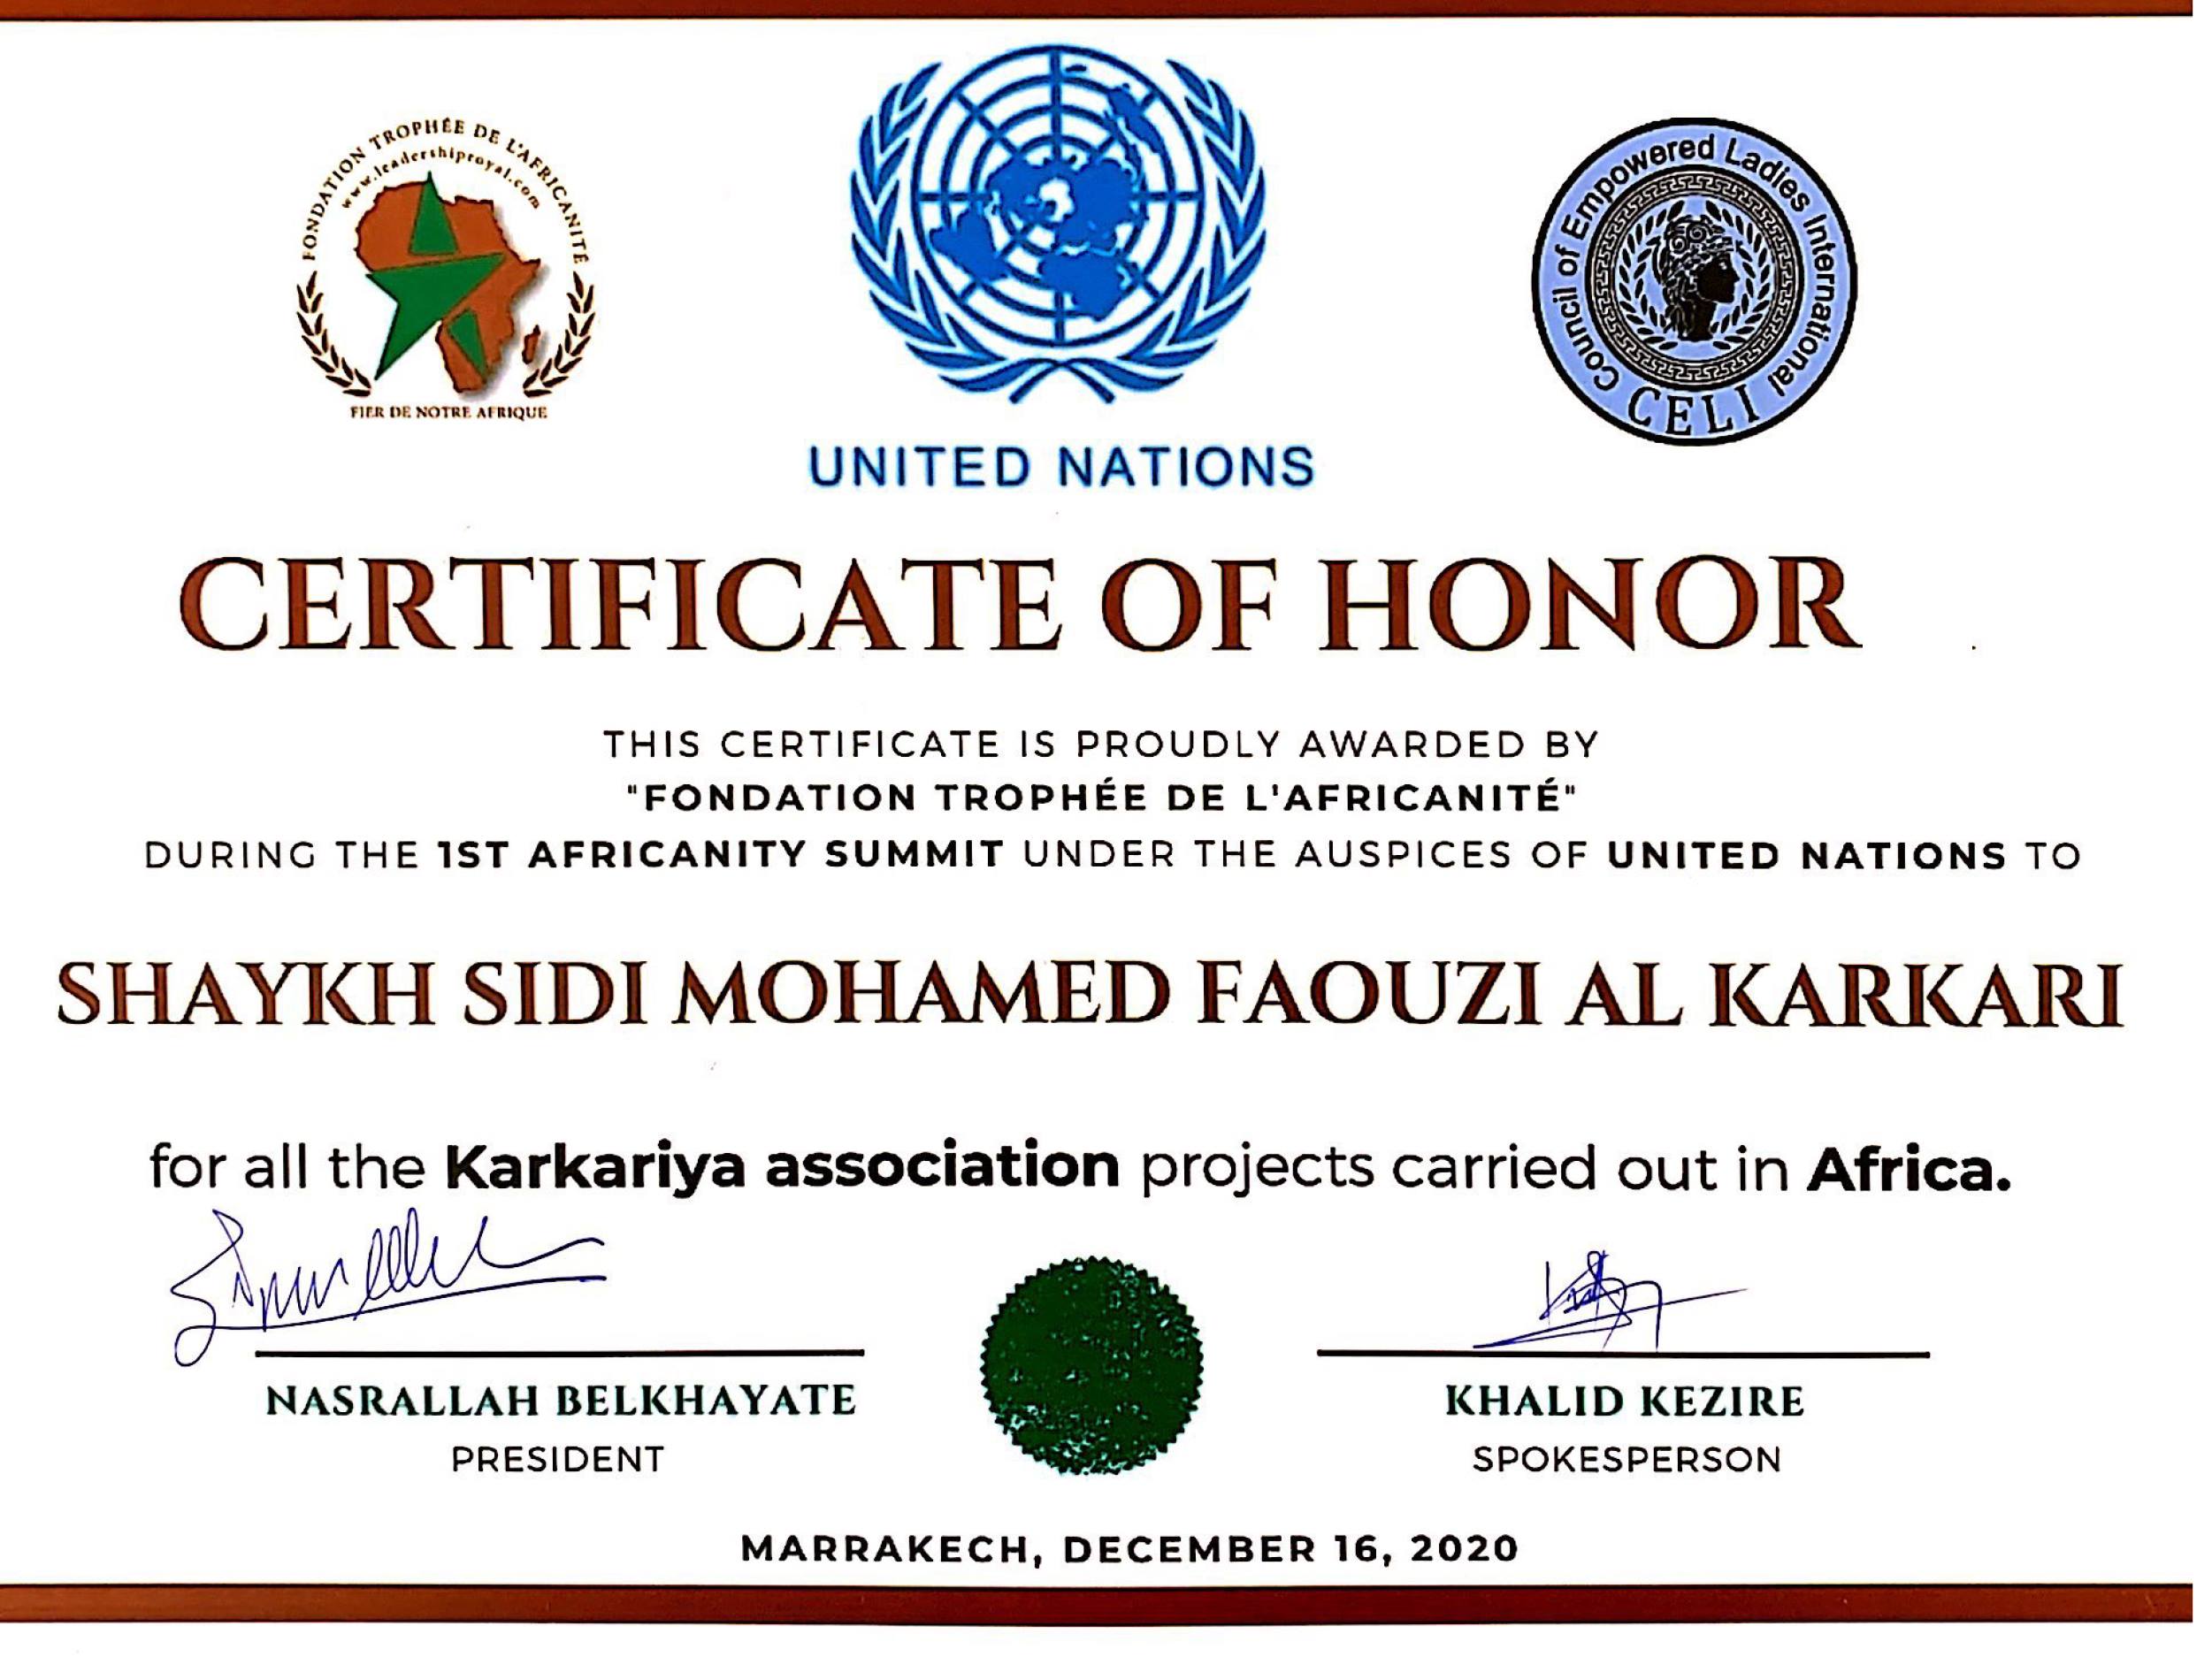 Under the auspices of the United Nations, Fondation du Trophée de l’Africanité awards the certificate of honor to Sidi Shaykh Mohamed Faouzi Al Karkari